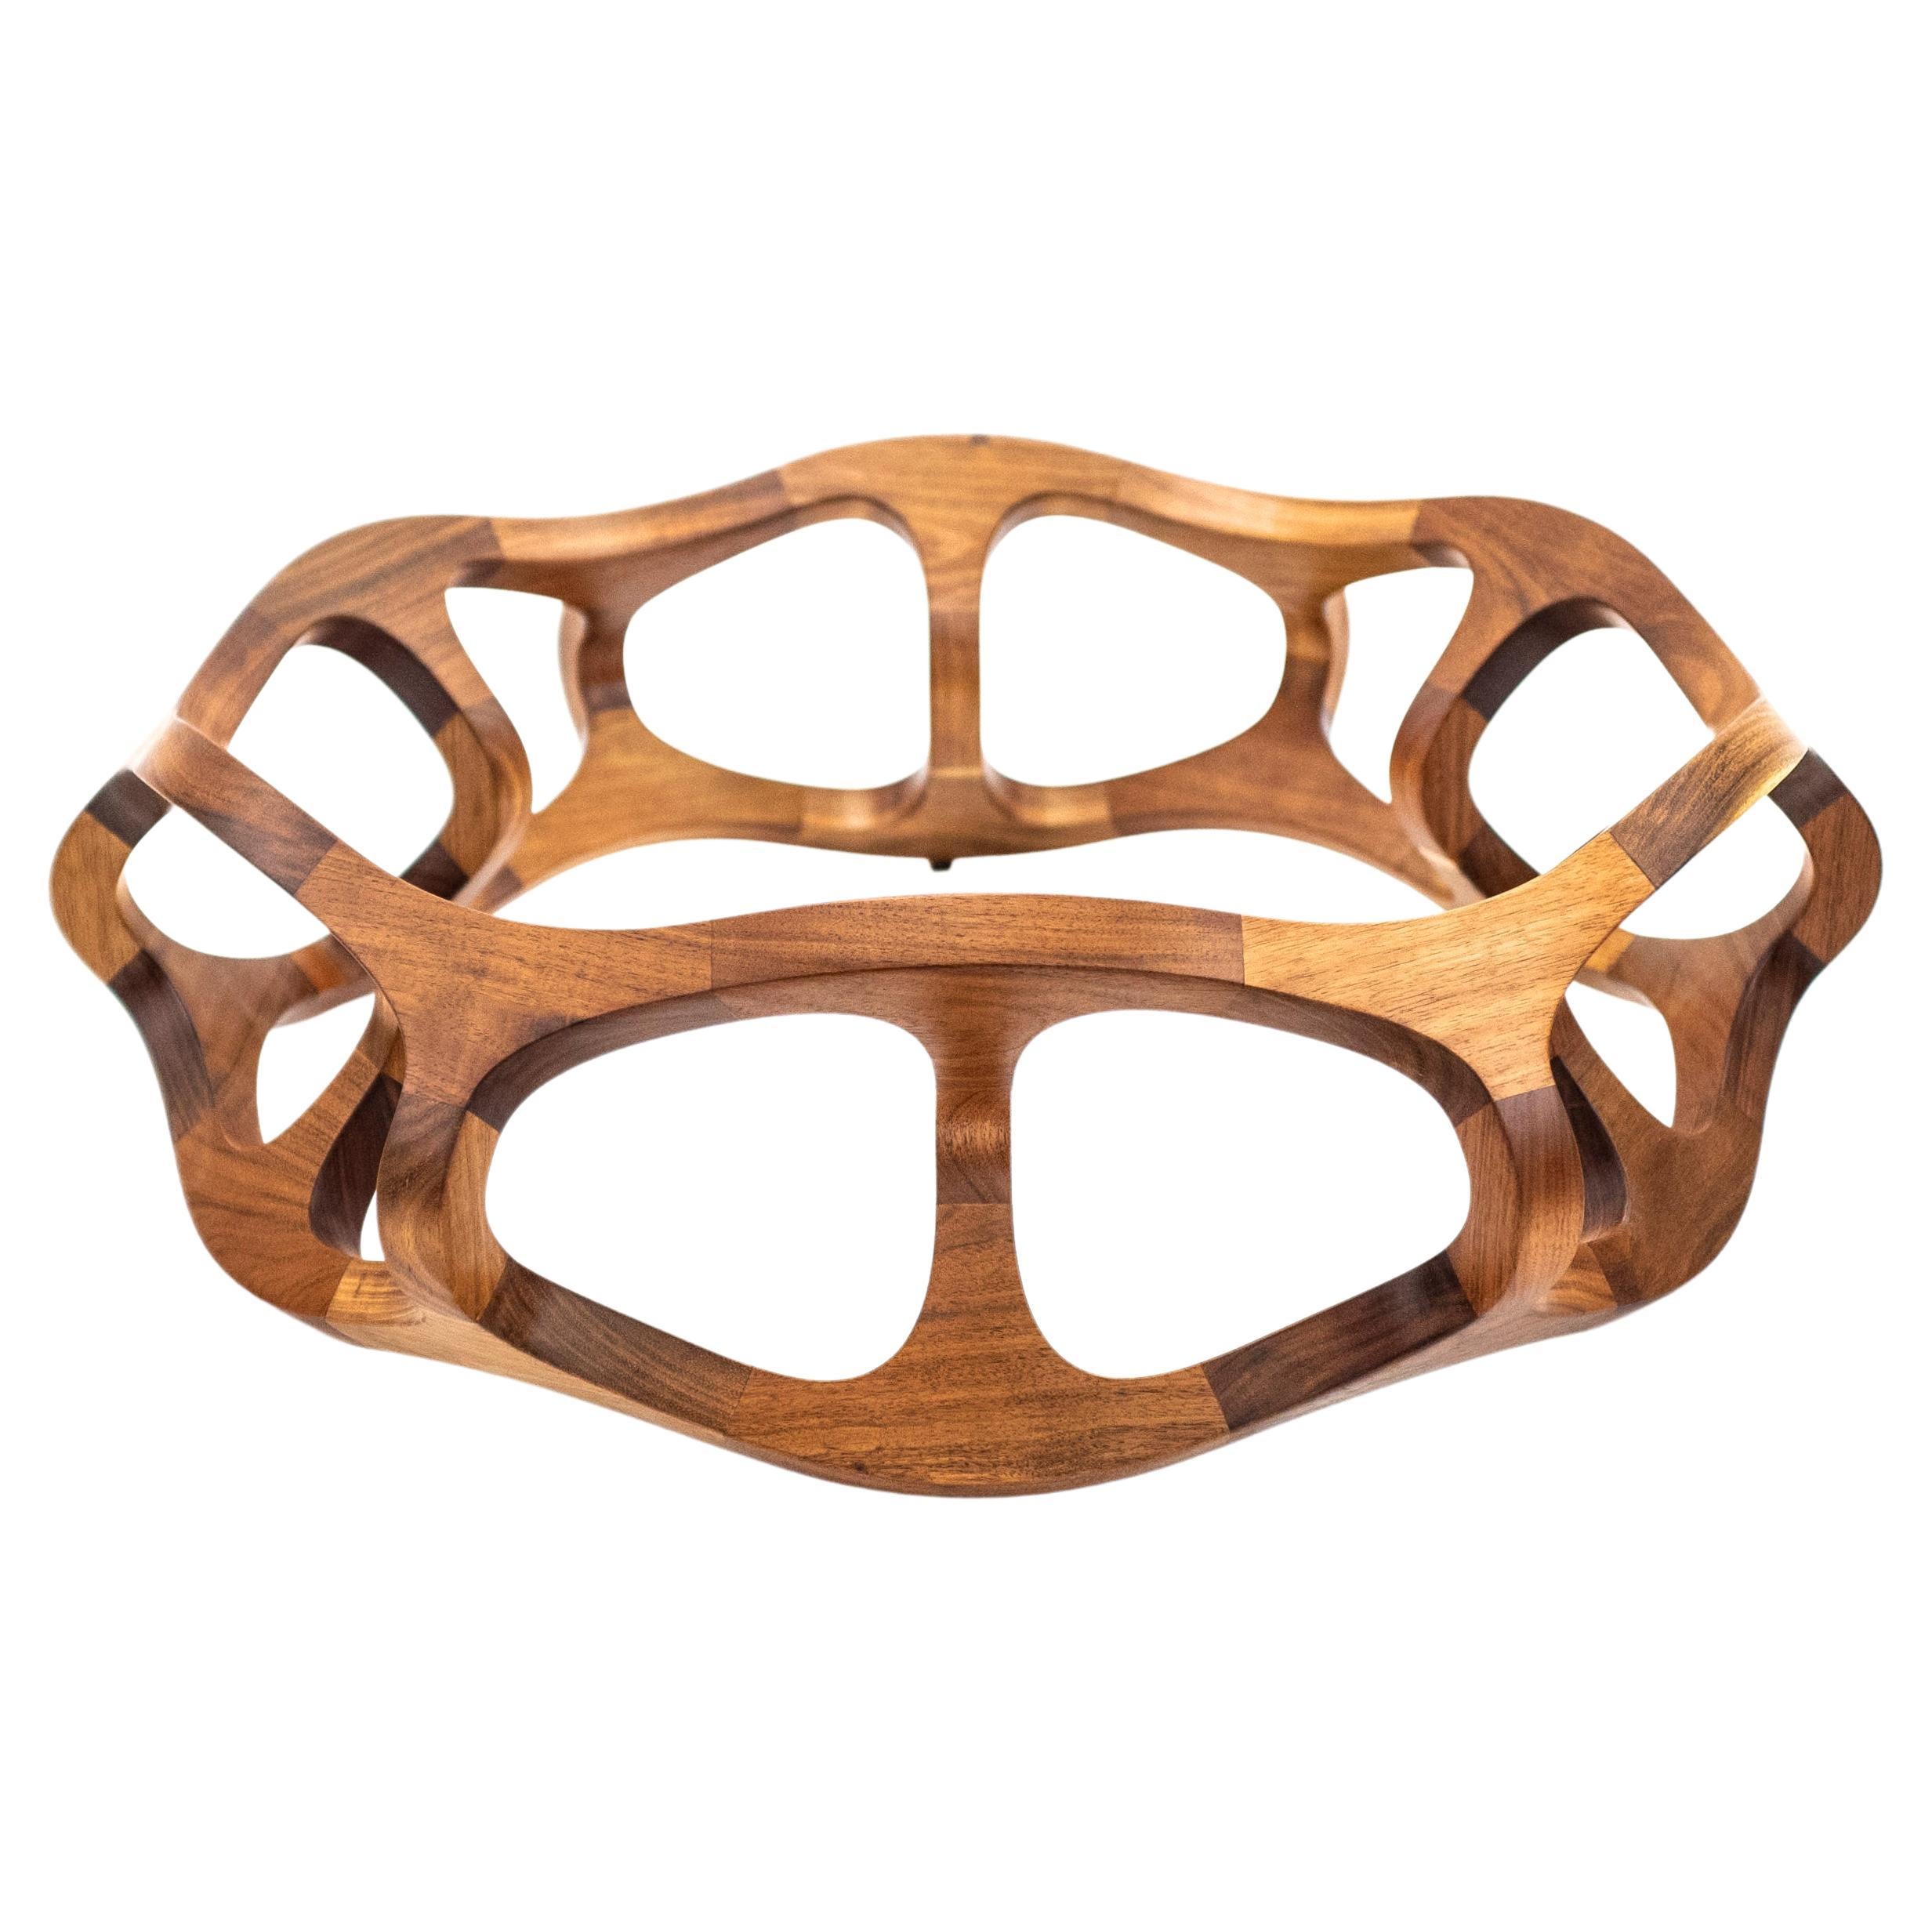 Toro G6, Geometric Sculptural Center Table Made of Solid Wood by Pedro Cerisola For Sale